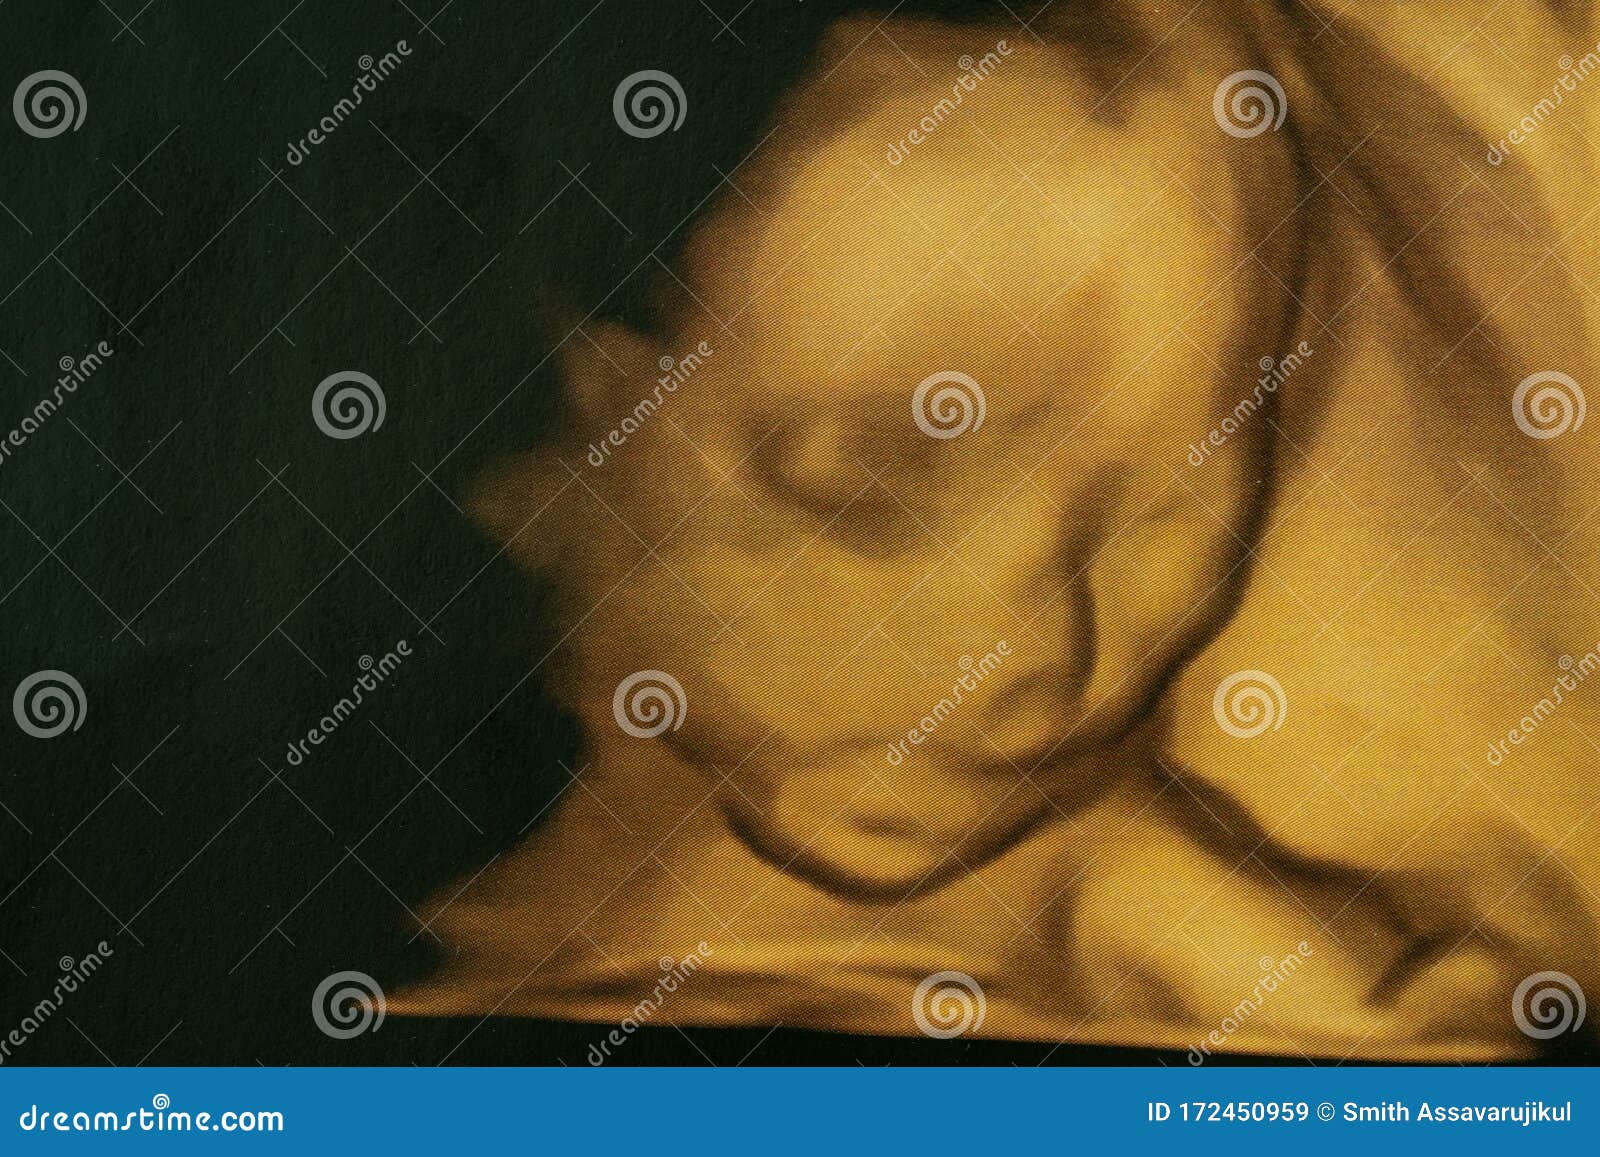 the image of ultrasound 3d/4d of baby in mother`s womb or pregnancy